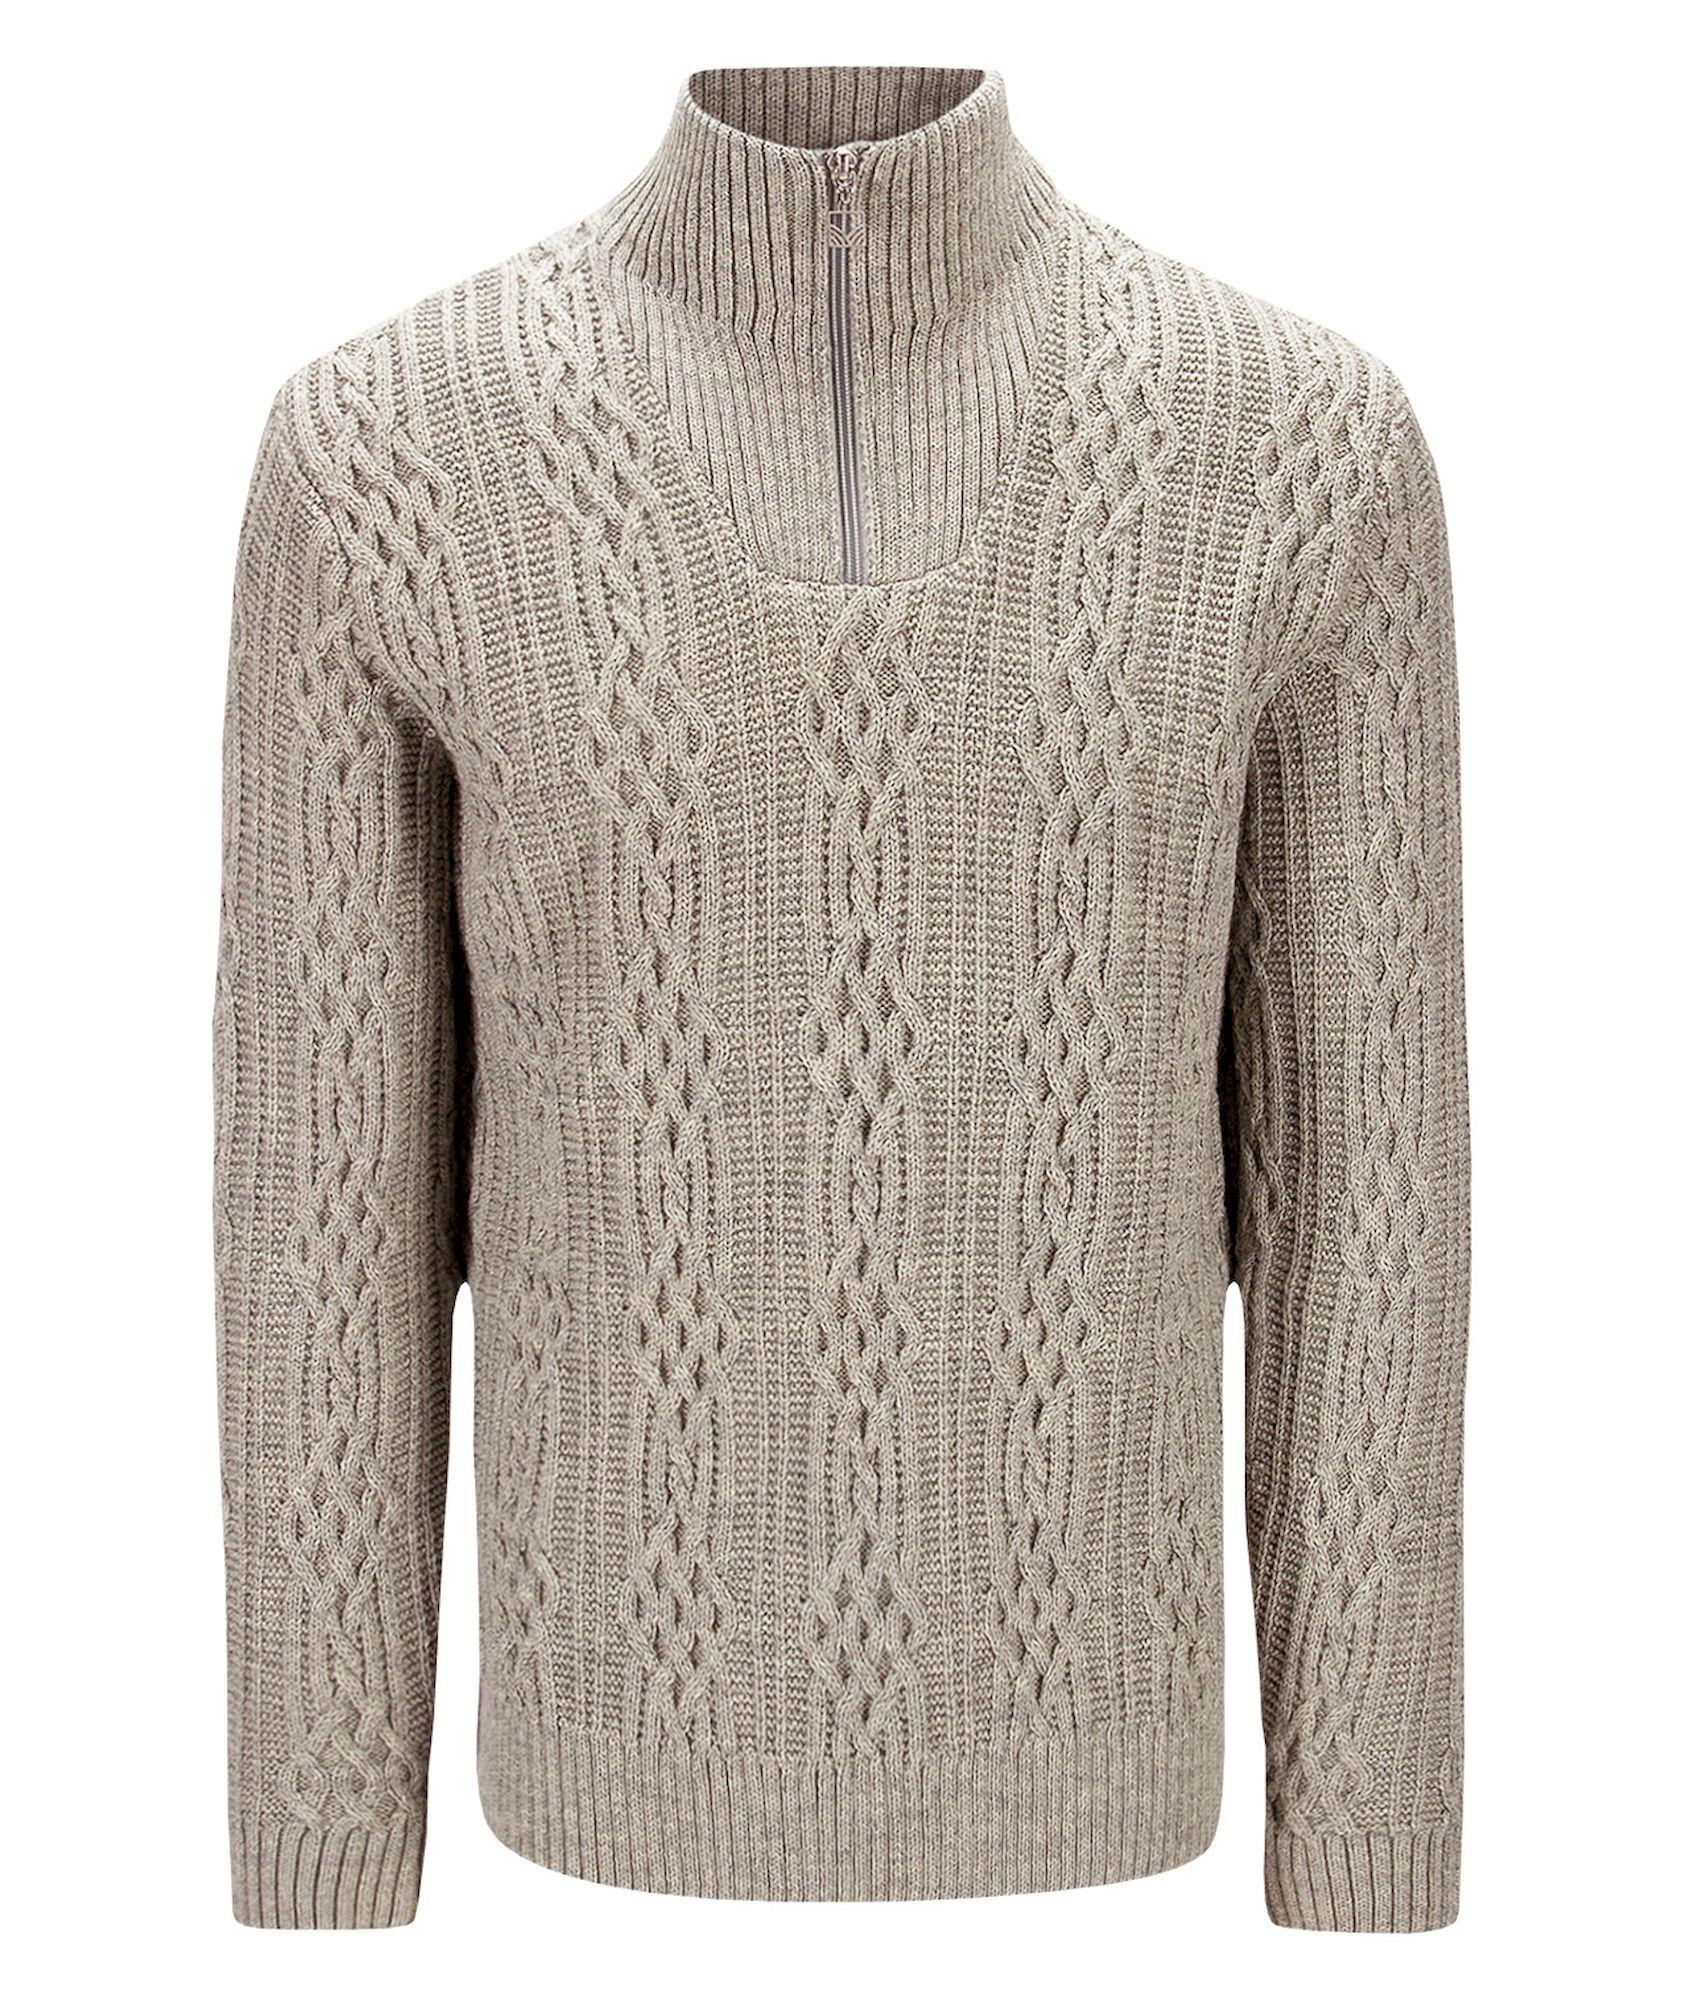 Dale of Norway Hoven Sweater - Pull en laine mérinos homme | Hardloop